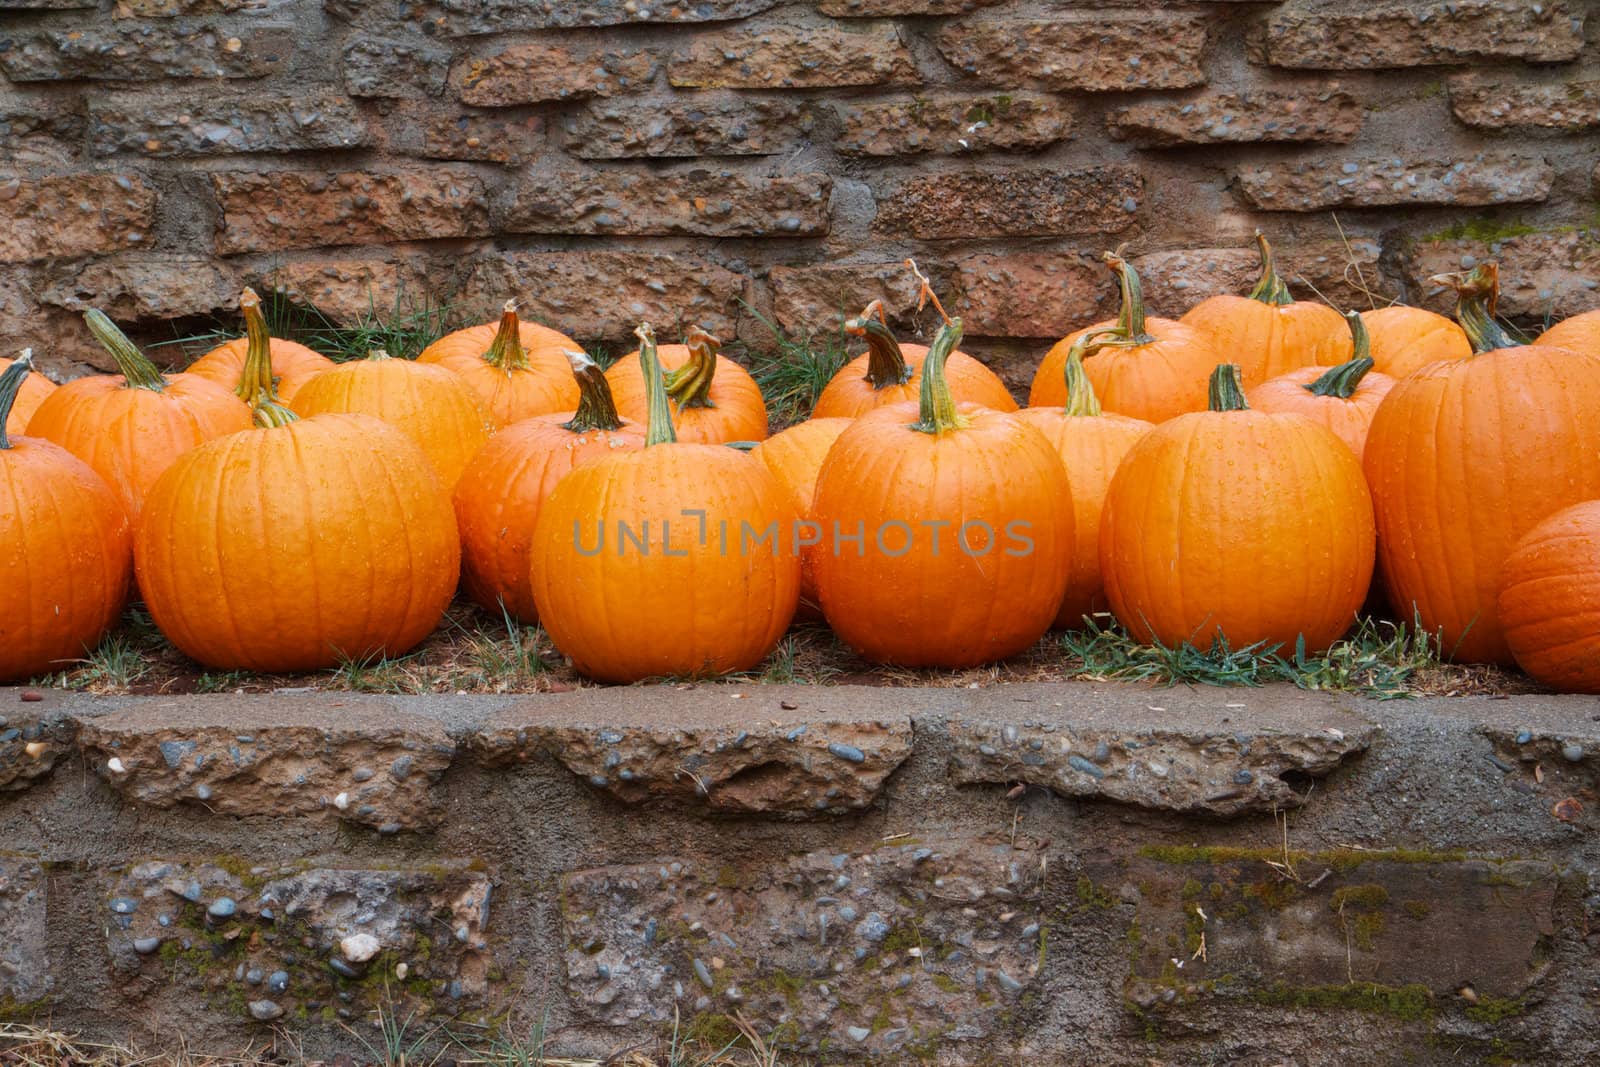 Several rows of orange pumkins on a ledge with stone wall background